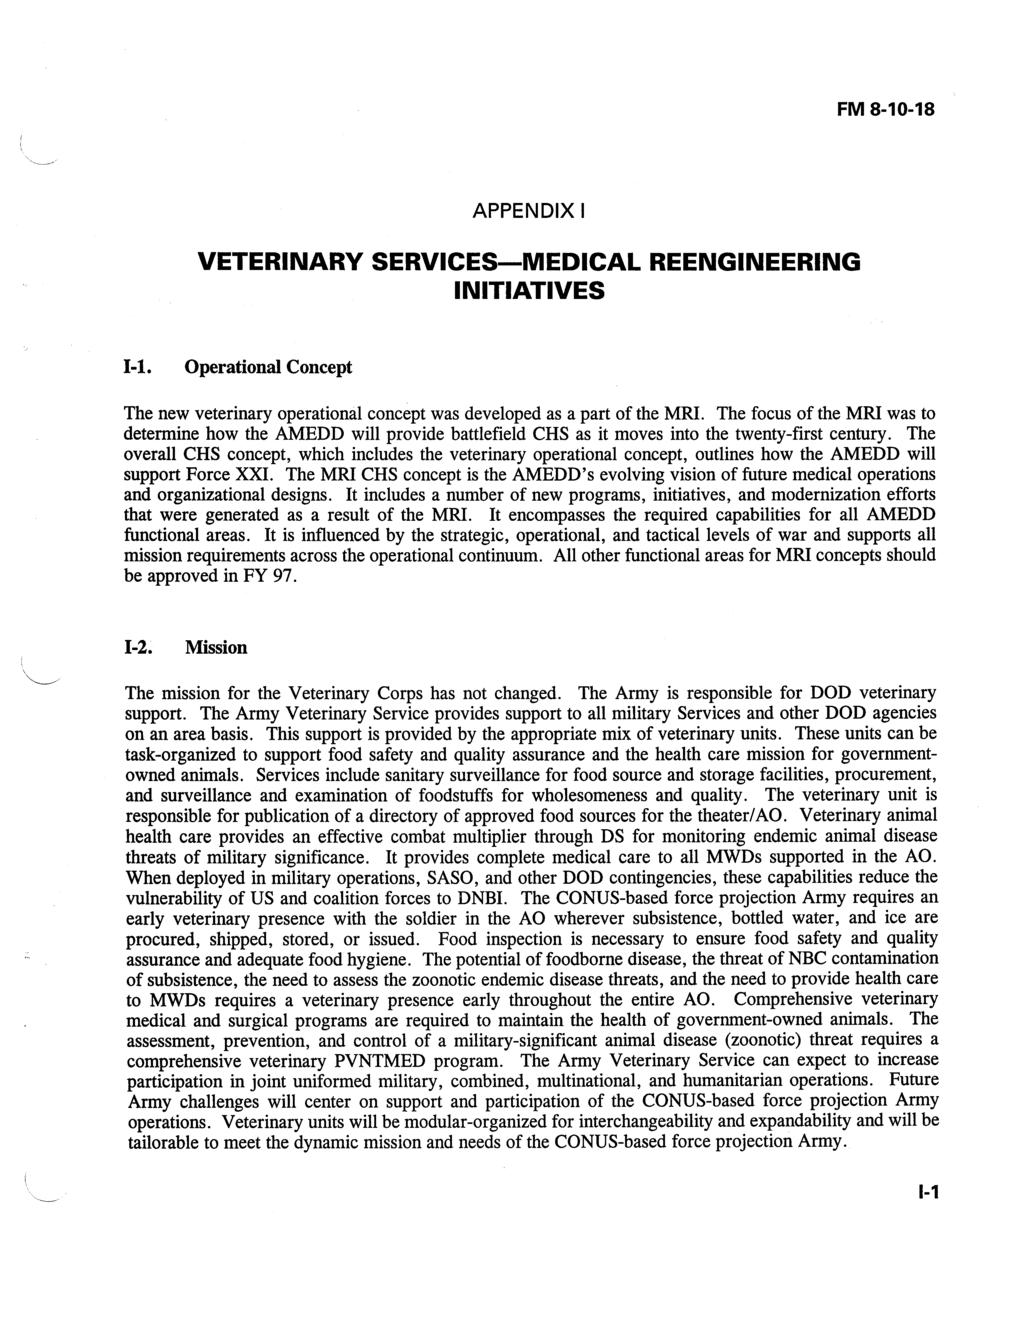 APPENDIX I VETERINARY SERVICES-MEDICAL REENGINEERING INITIATIVES I-1. Operational Concept The new veterinary operational concept was developed as a part of the MRI.